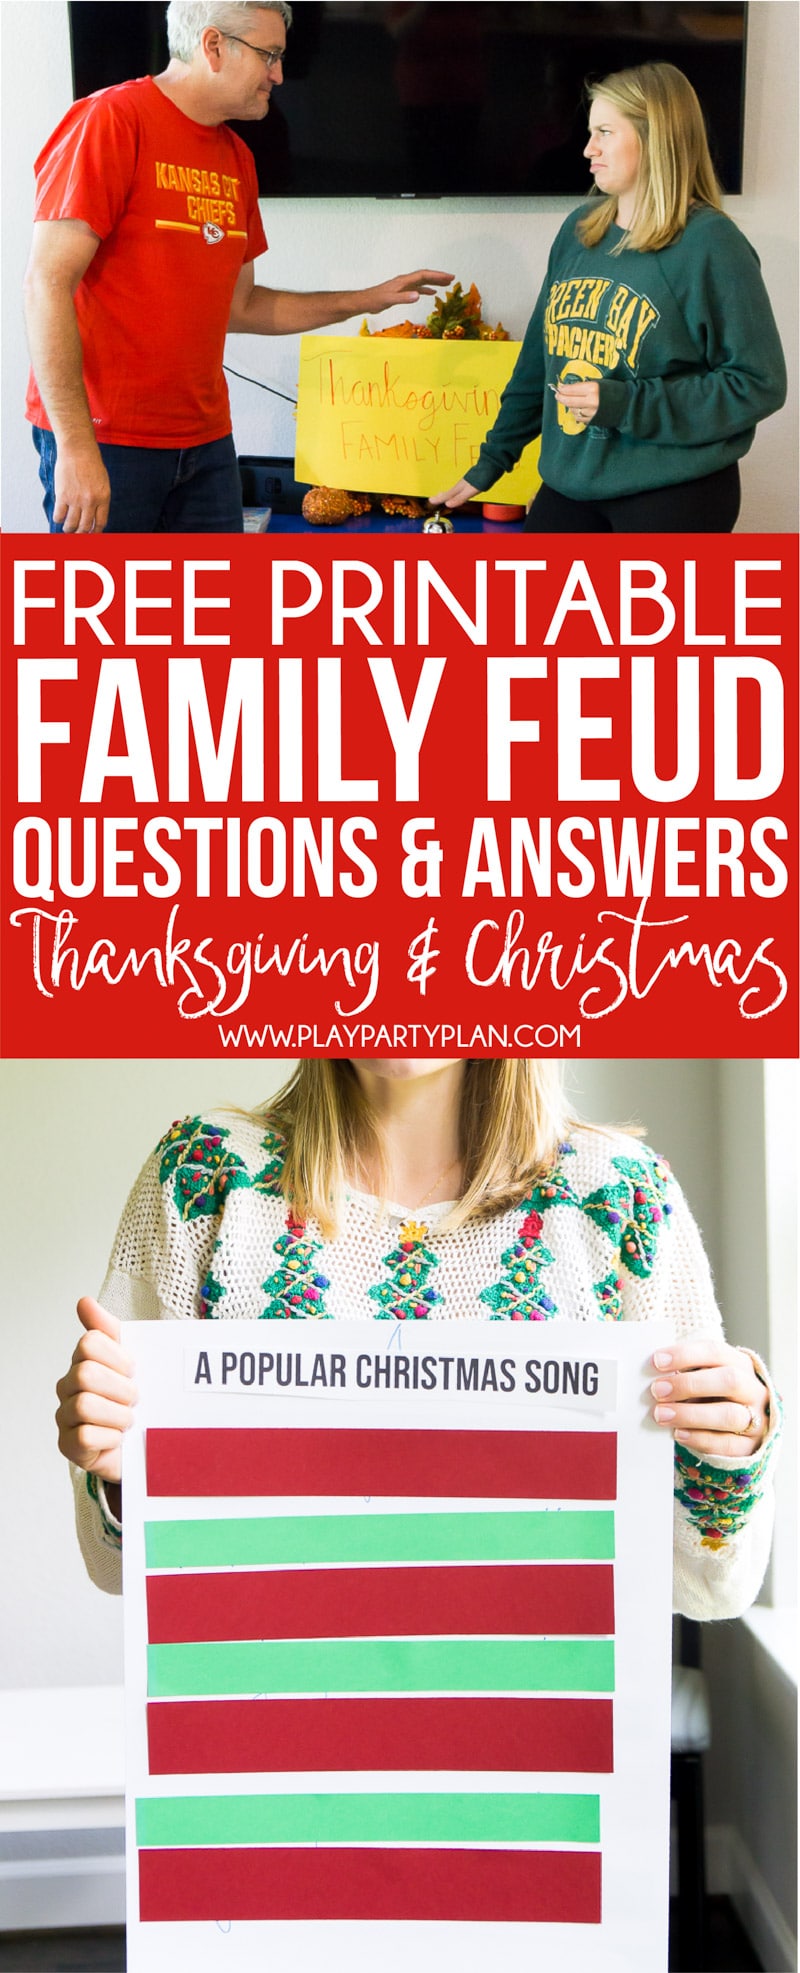 free-thanksgiving-christmas-family-fued-questions-play-party-plan